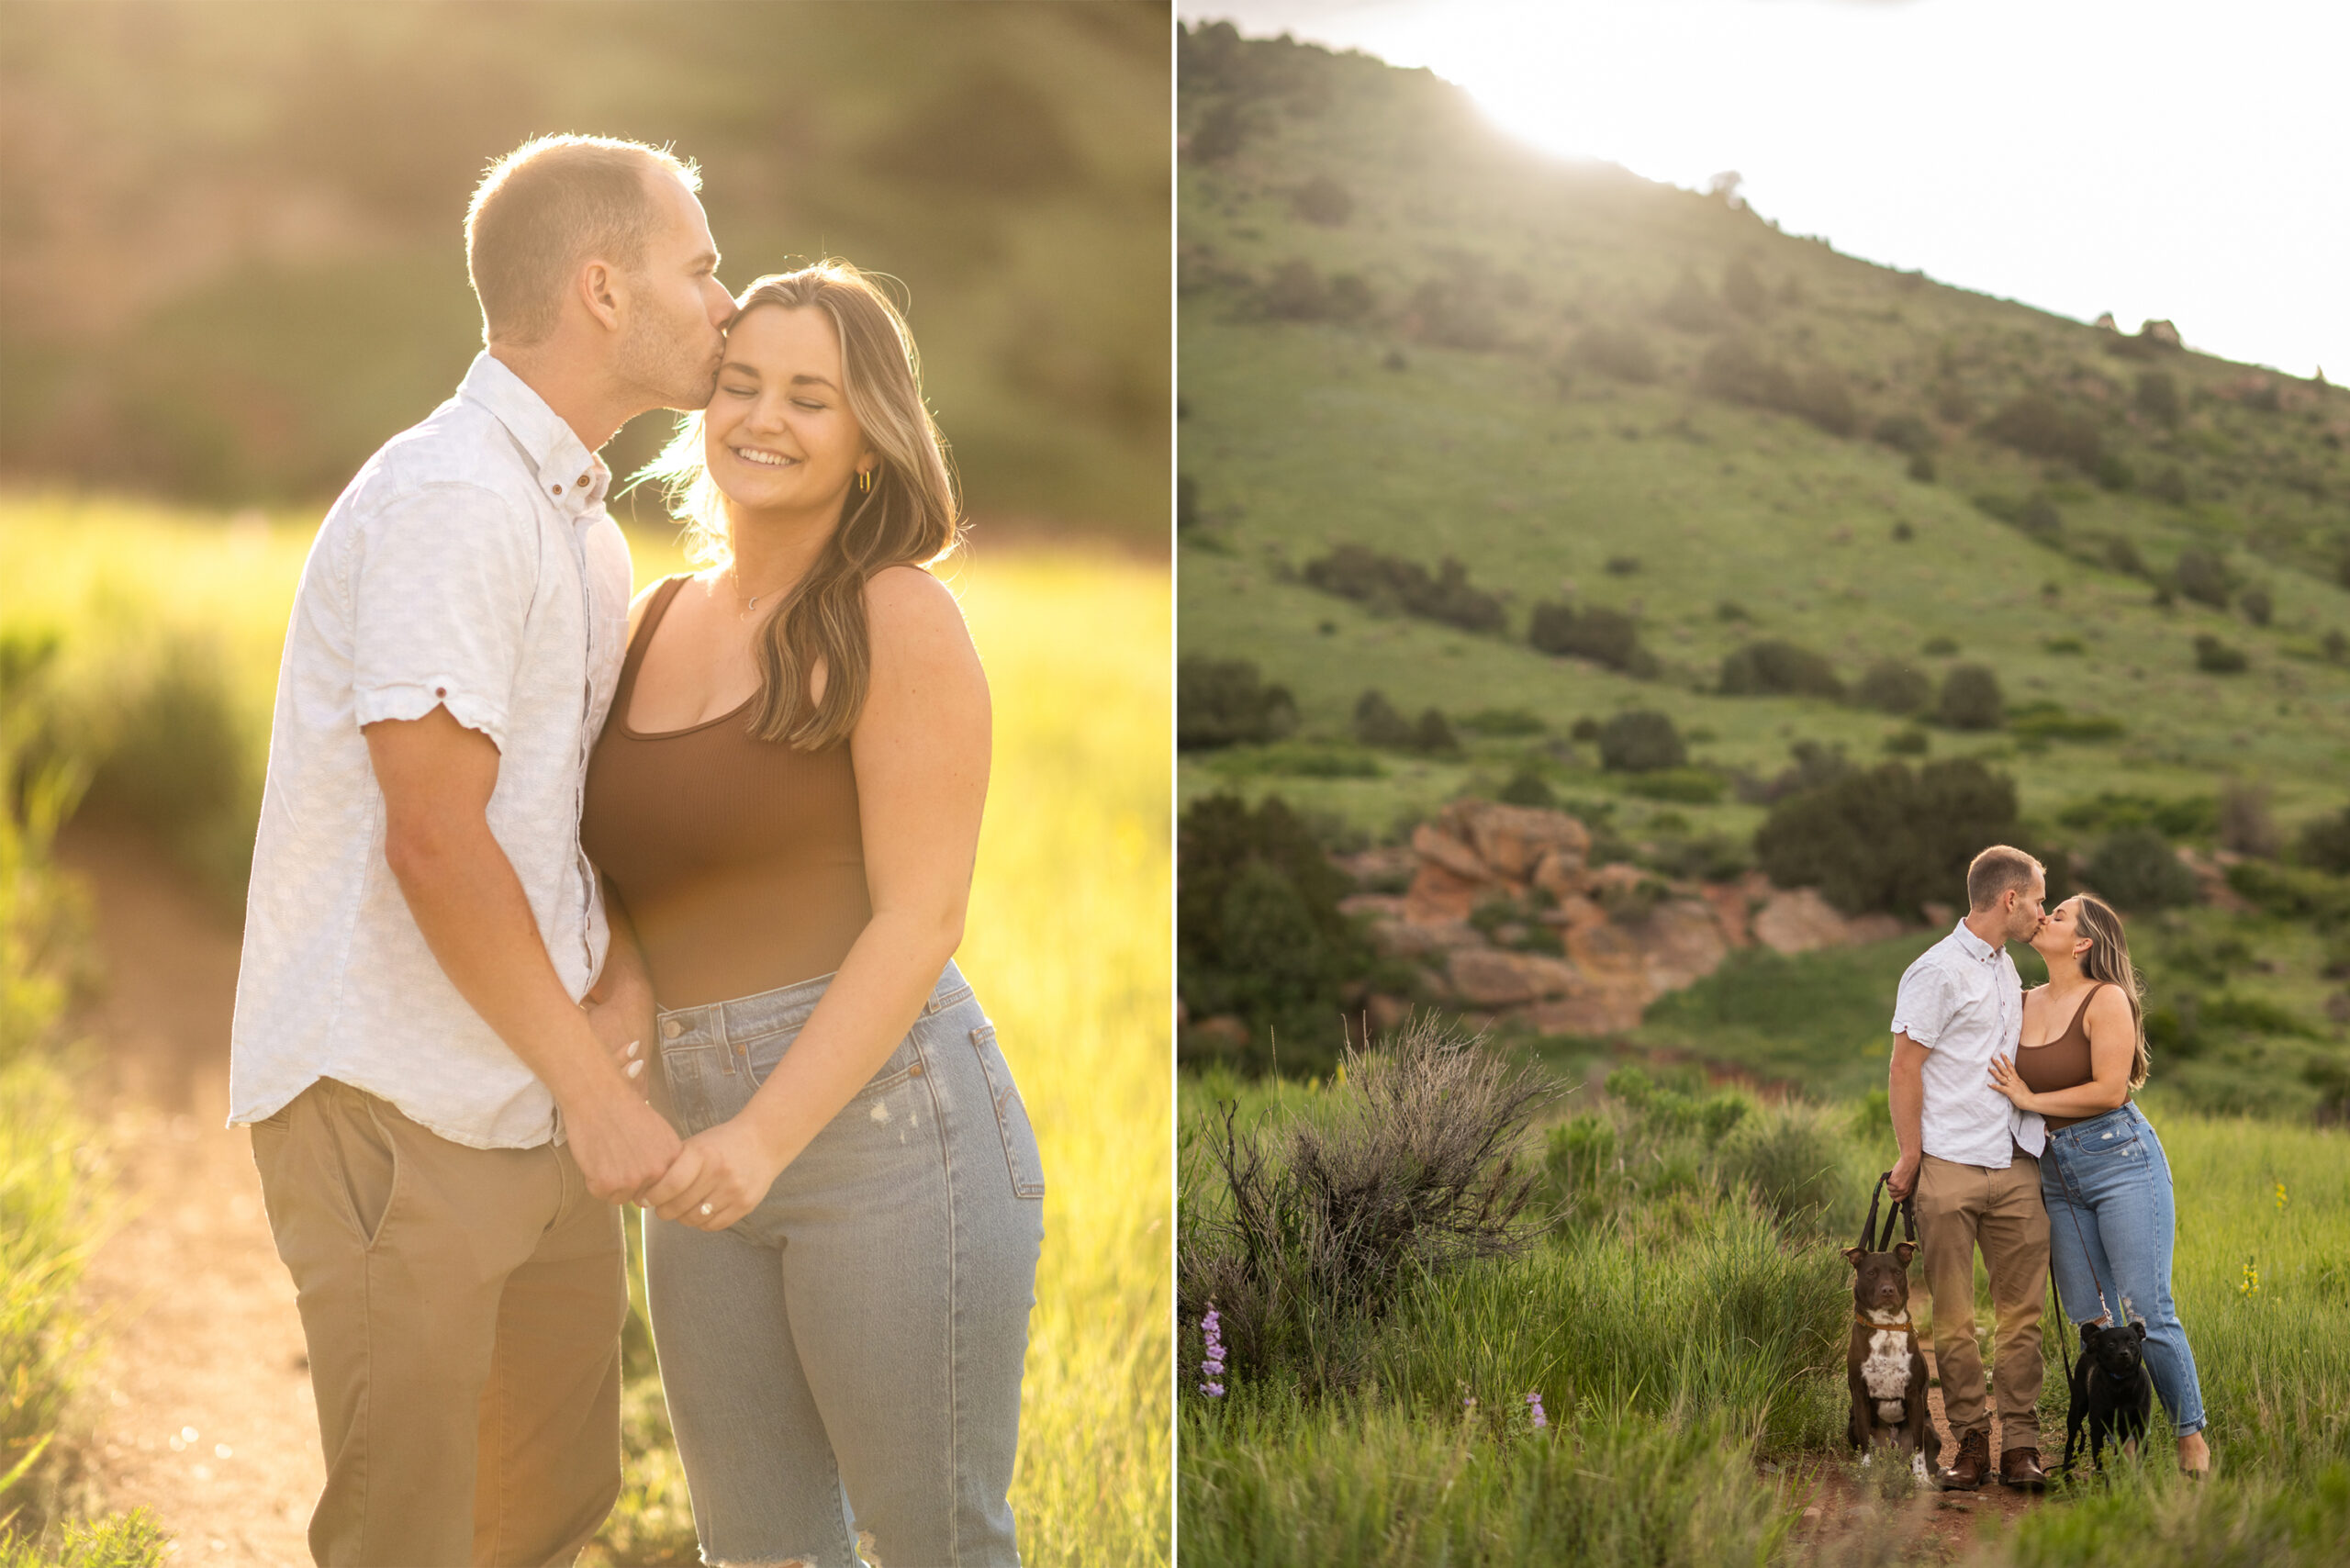 Ryan and Elizabeth and their dogs hug during surprise proposal and engagement photos at Mt. Falcon Park East Trailhead near Denver, Colorado.